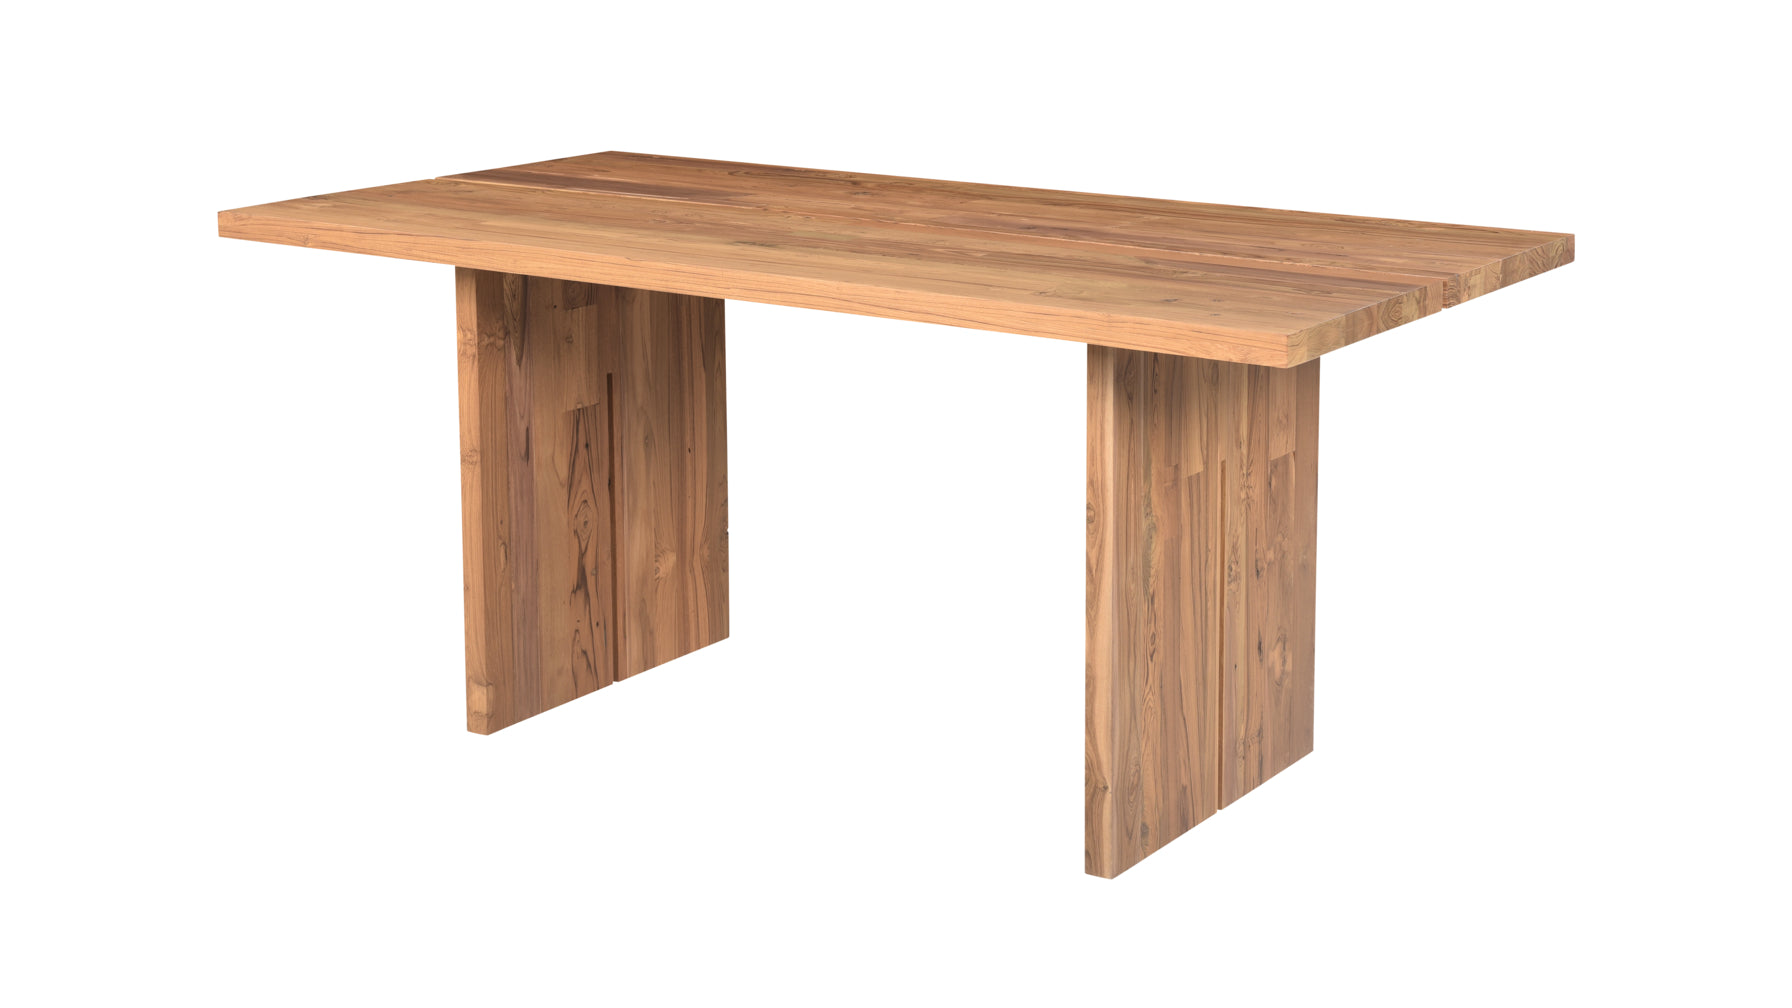 Plane Outdoor Dining Table, Seats 6-8, Teak - Image 4